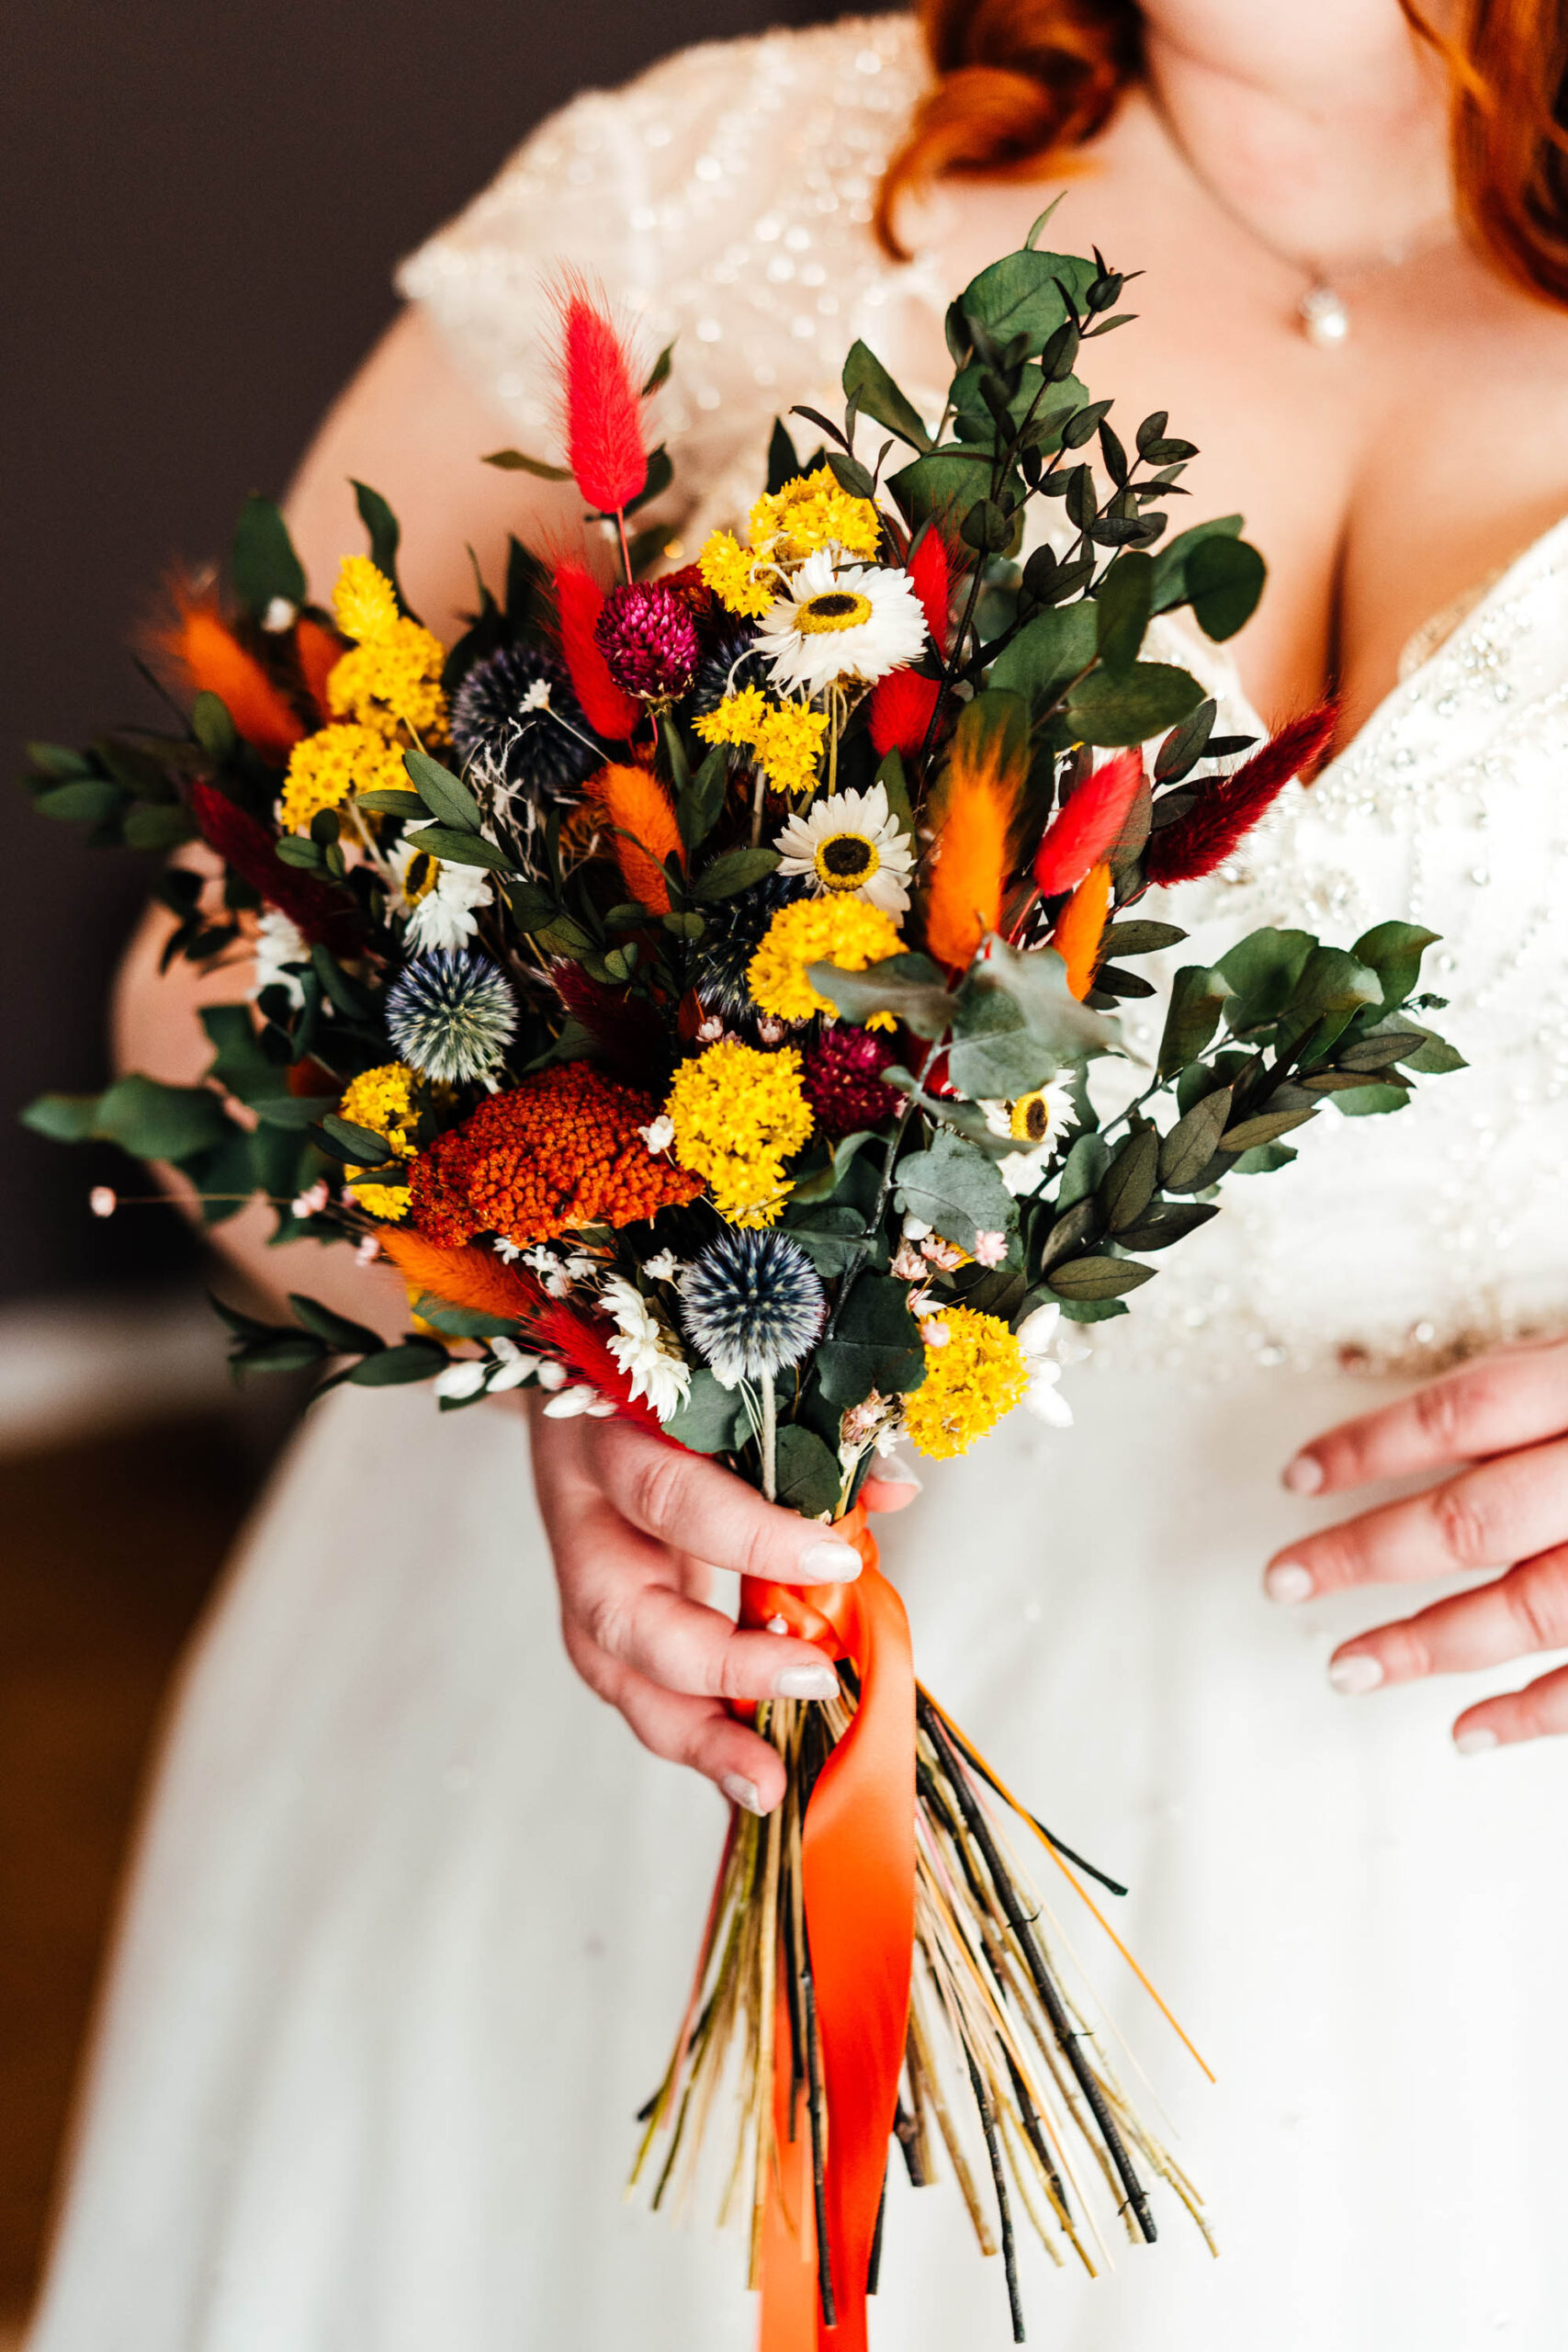 15 Incredible Wedding Bouquets For